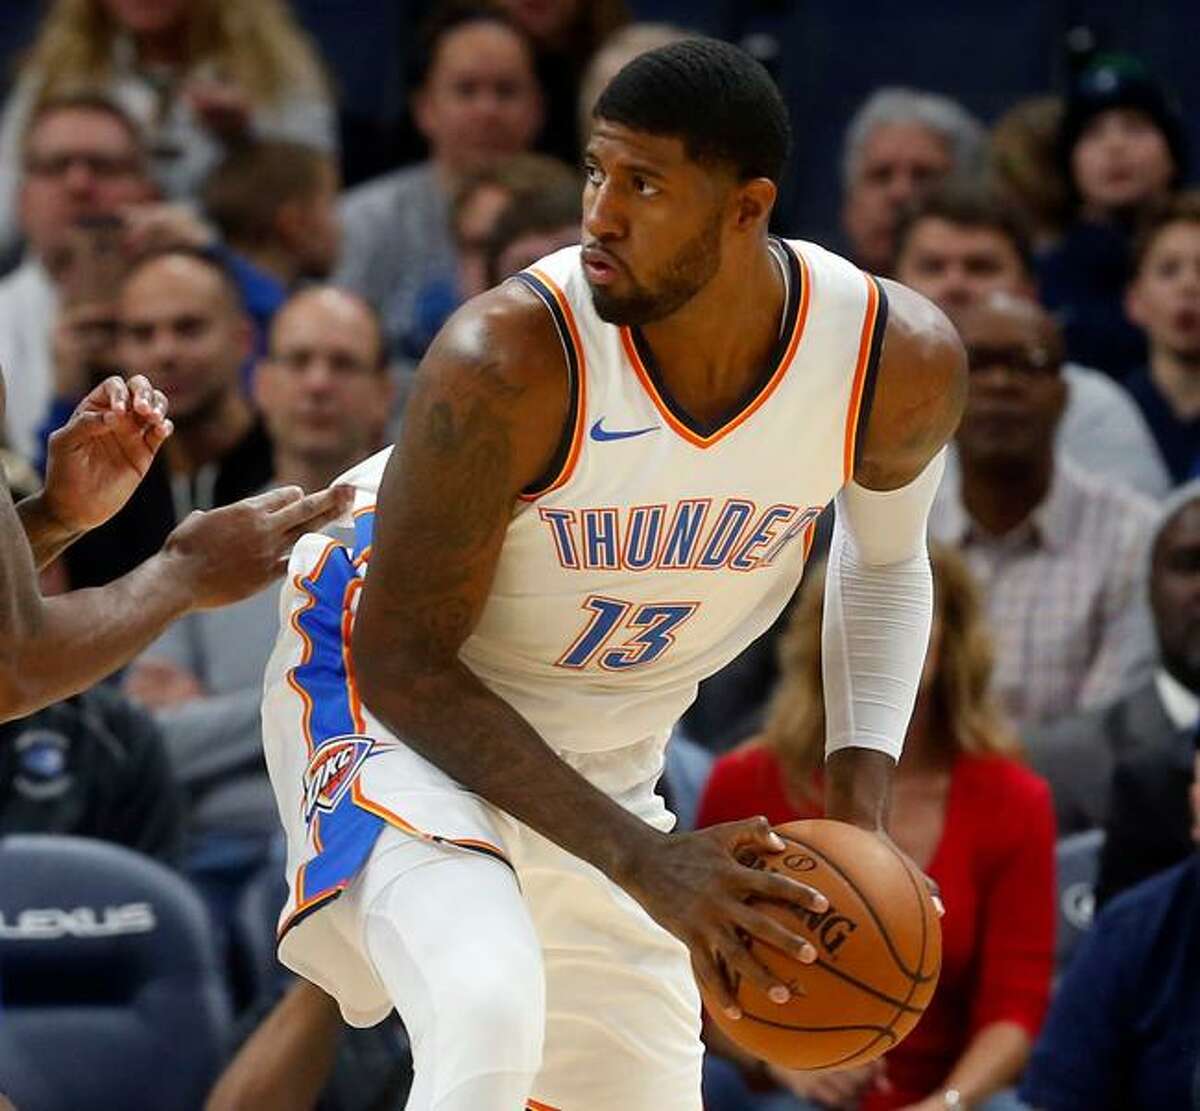 Oklahoma City Thunder's Paul George in action on Oct. 27, 2017 in Minneapolis.